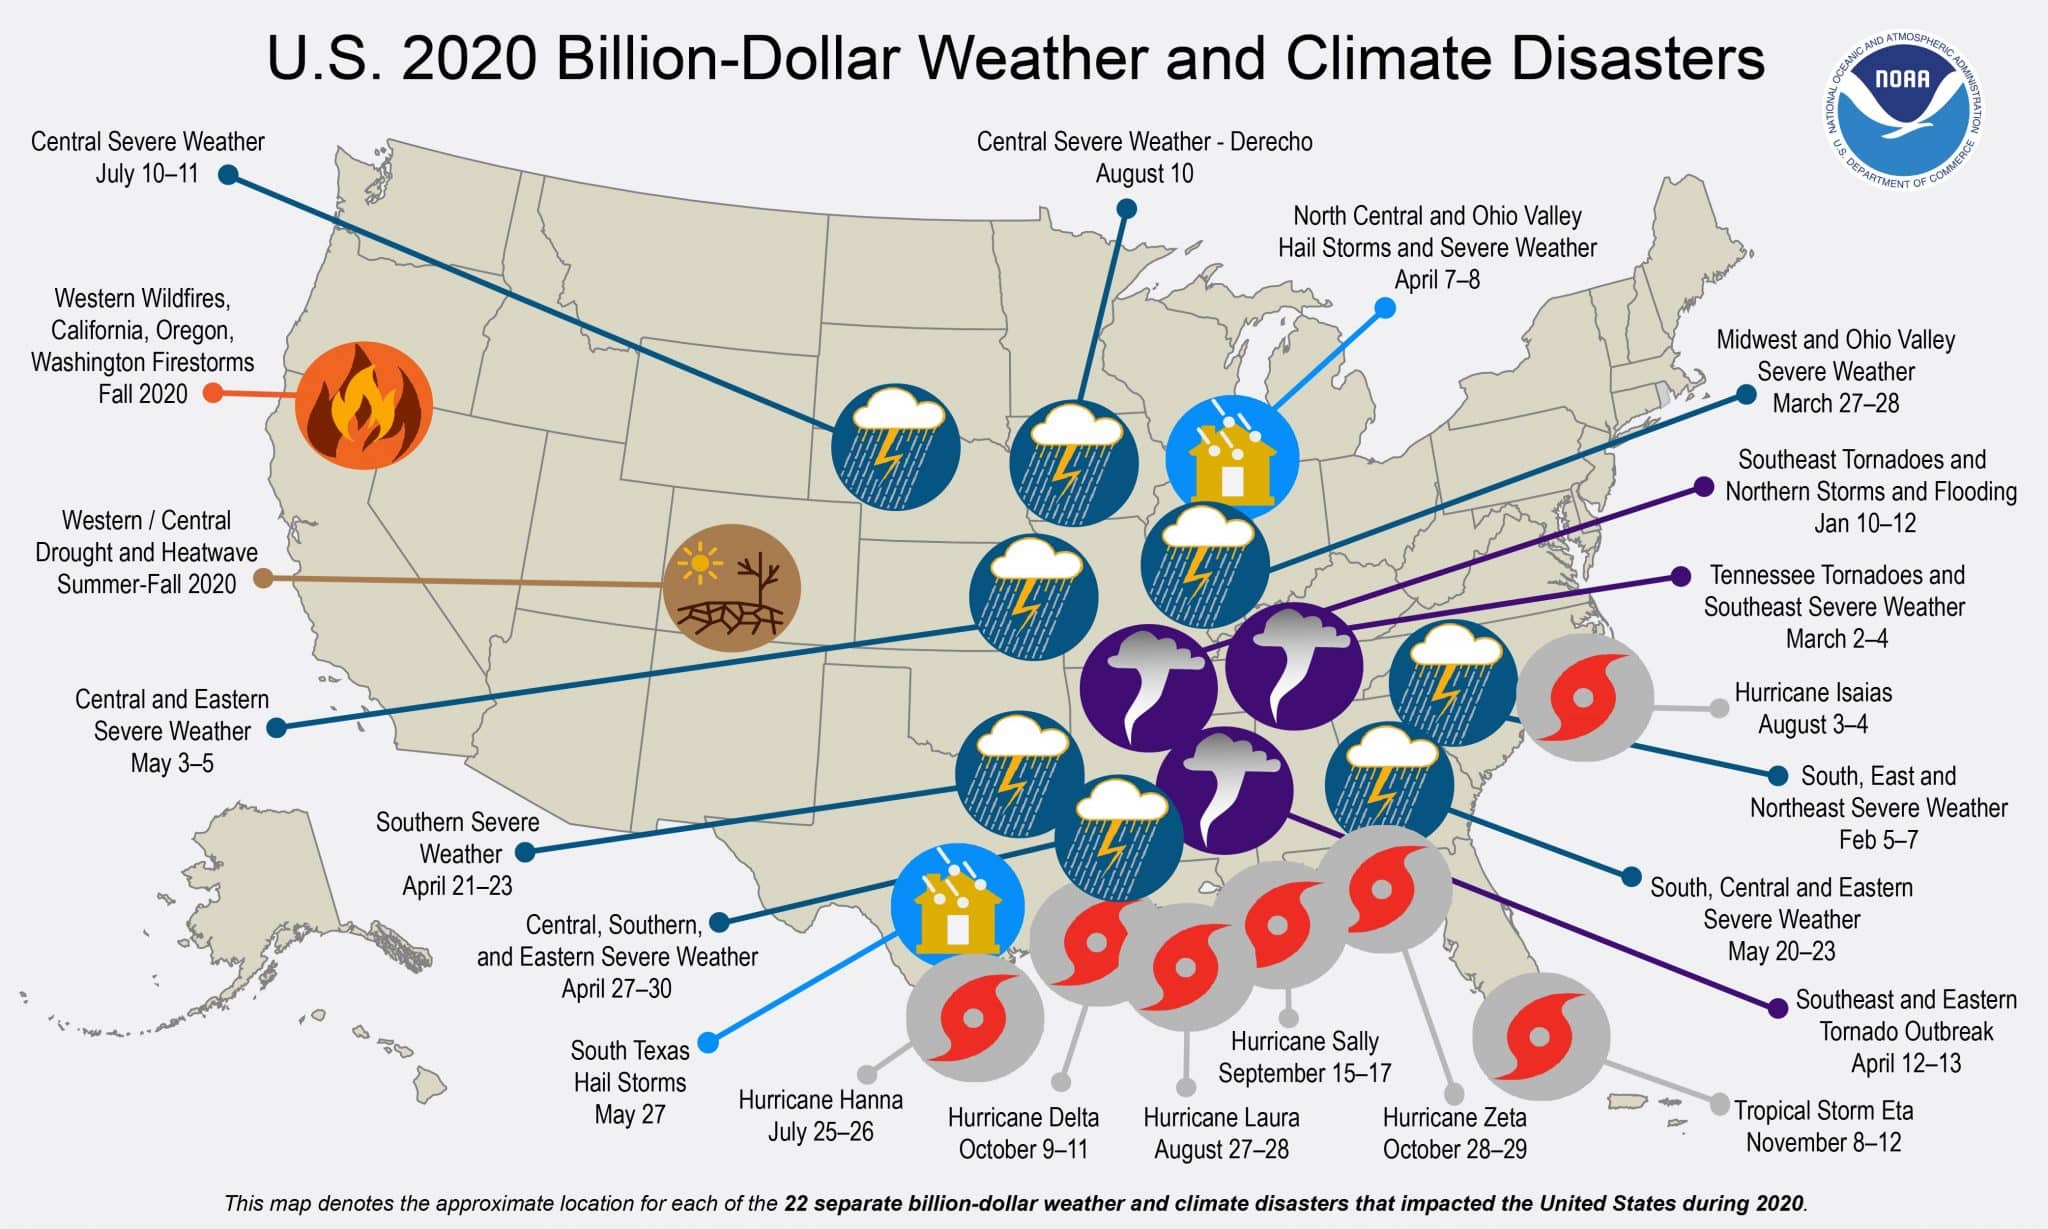 Record number of billiondollar disasters struck U.S. in 2020 Climate